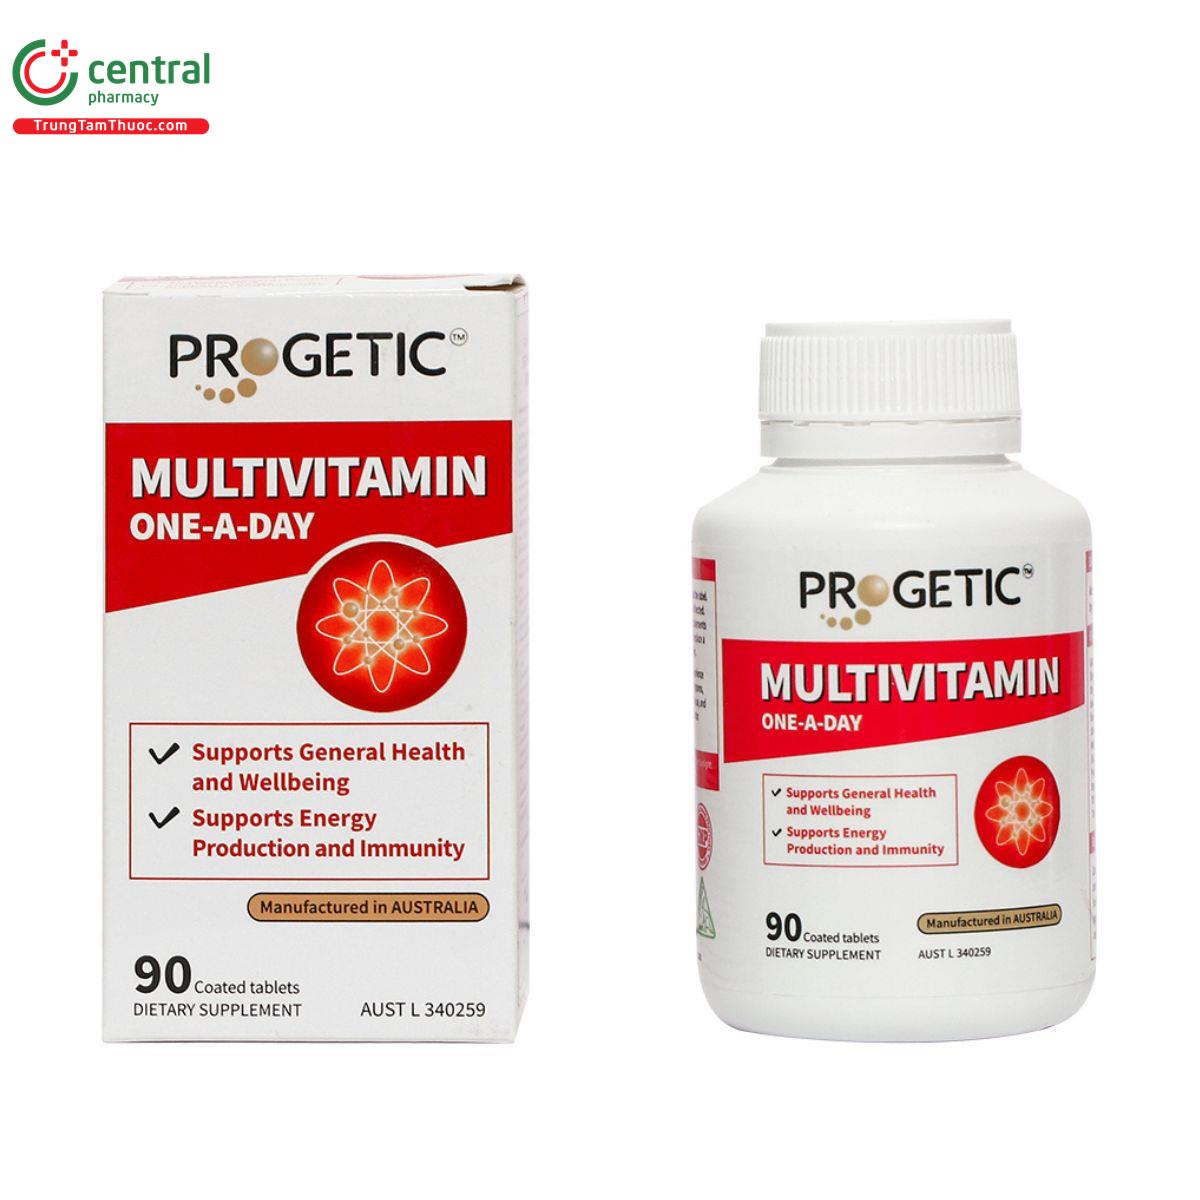 progetic multivitamin one a day J3158